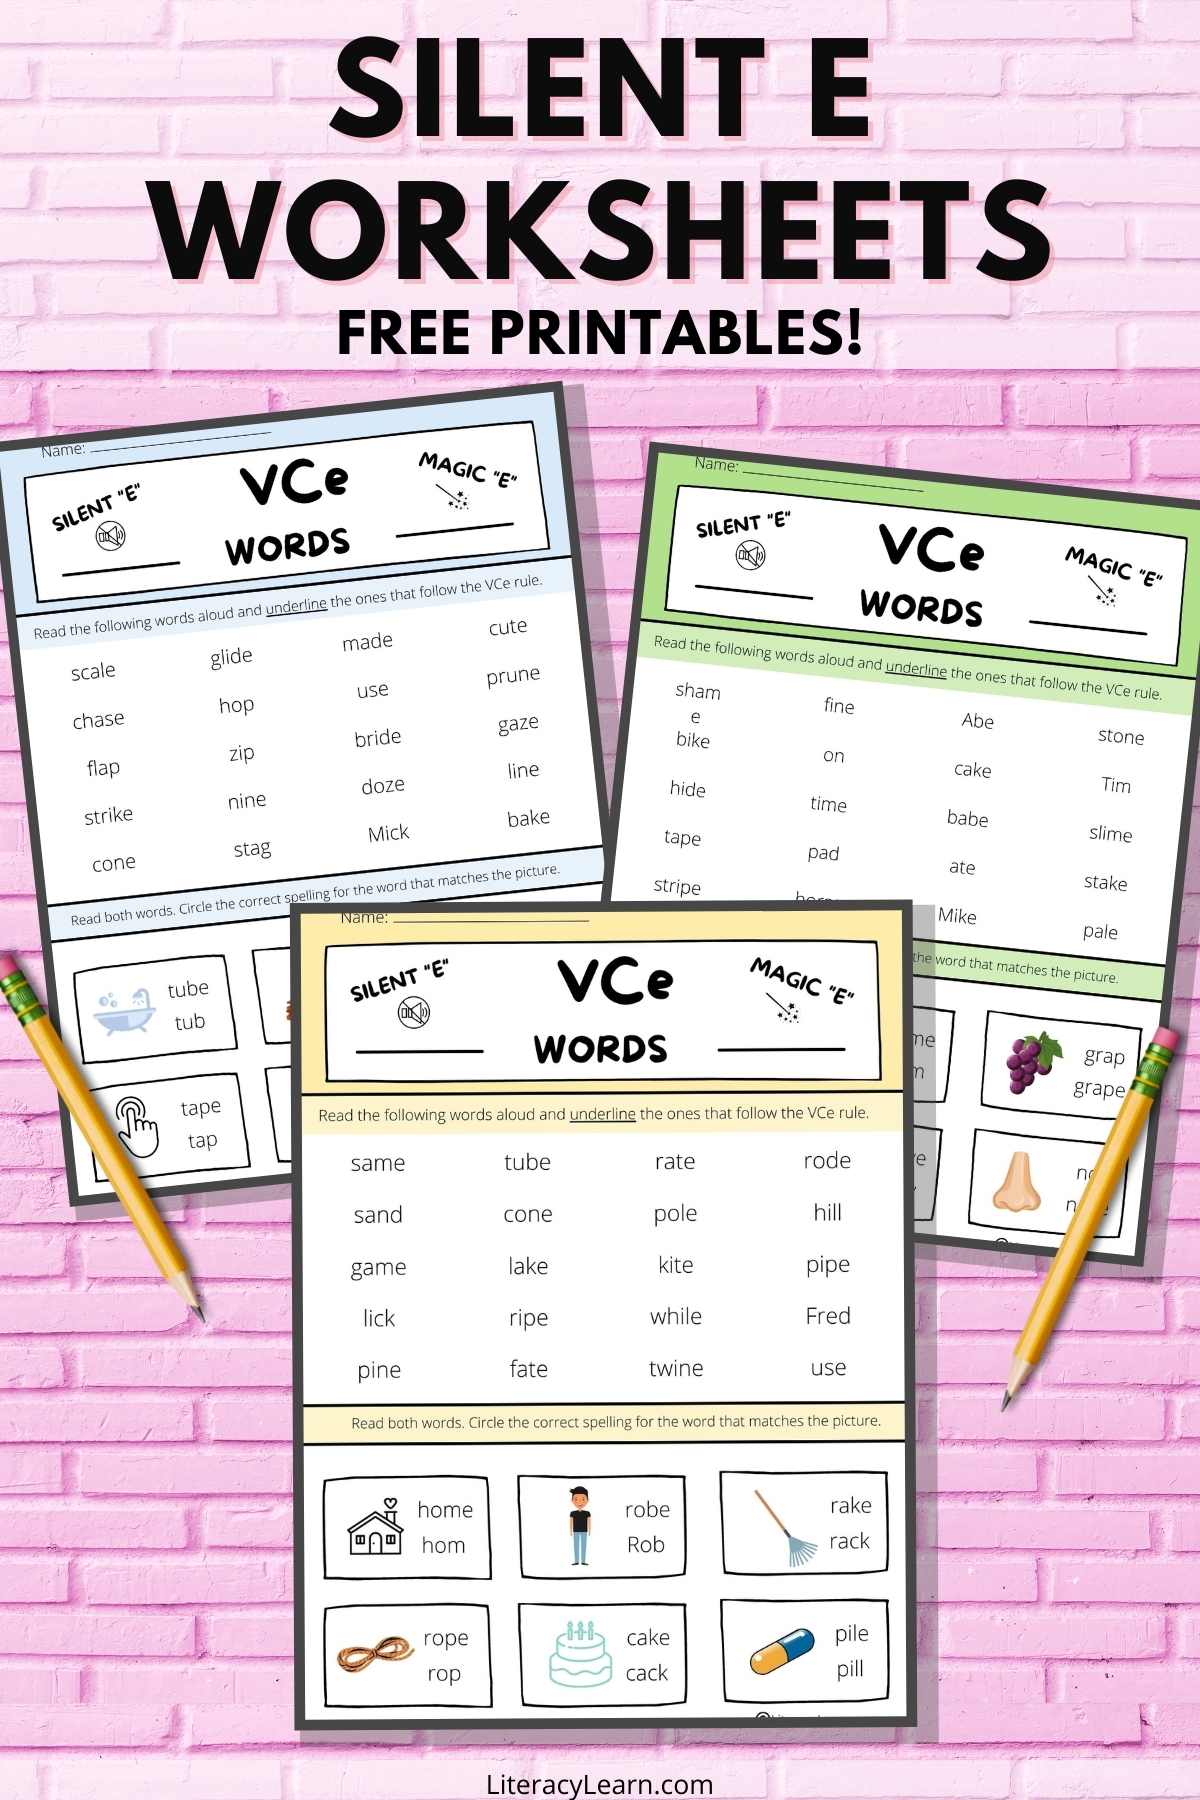 silent-e-worksheets-free-printables-literacy-learn